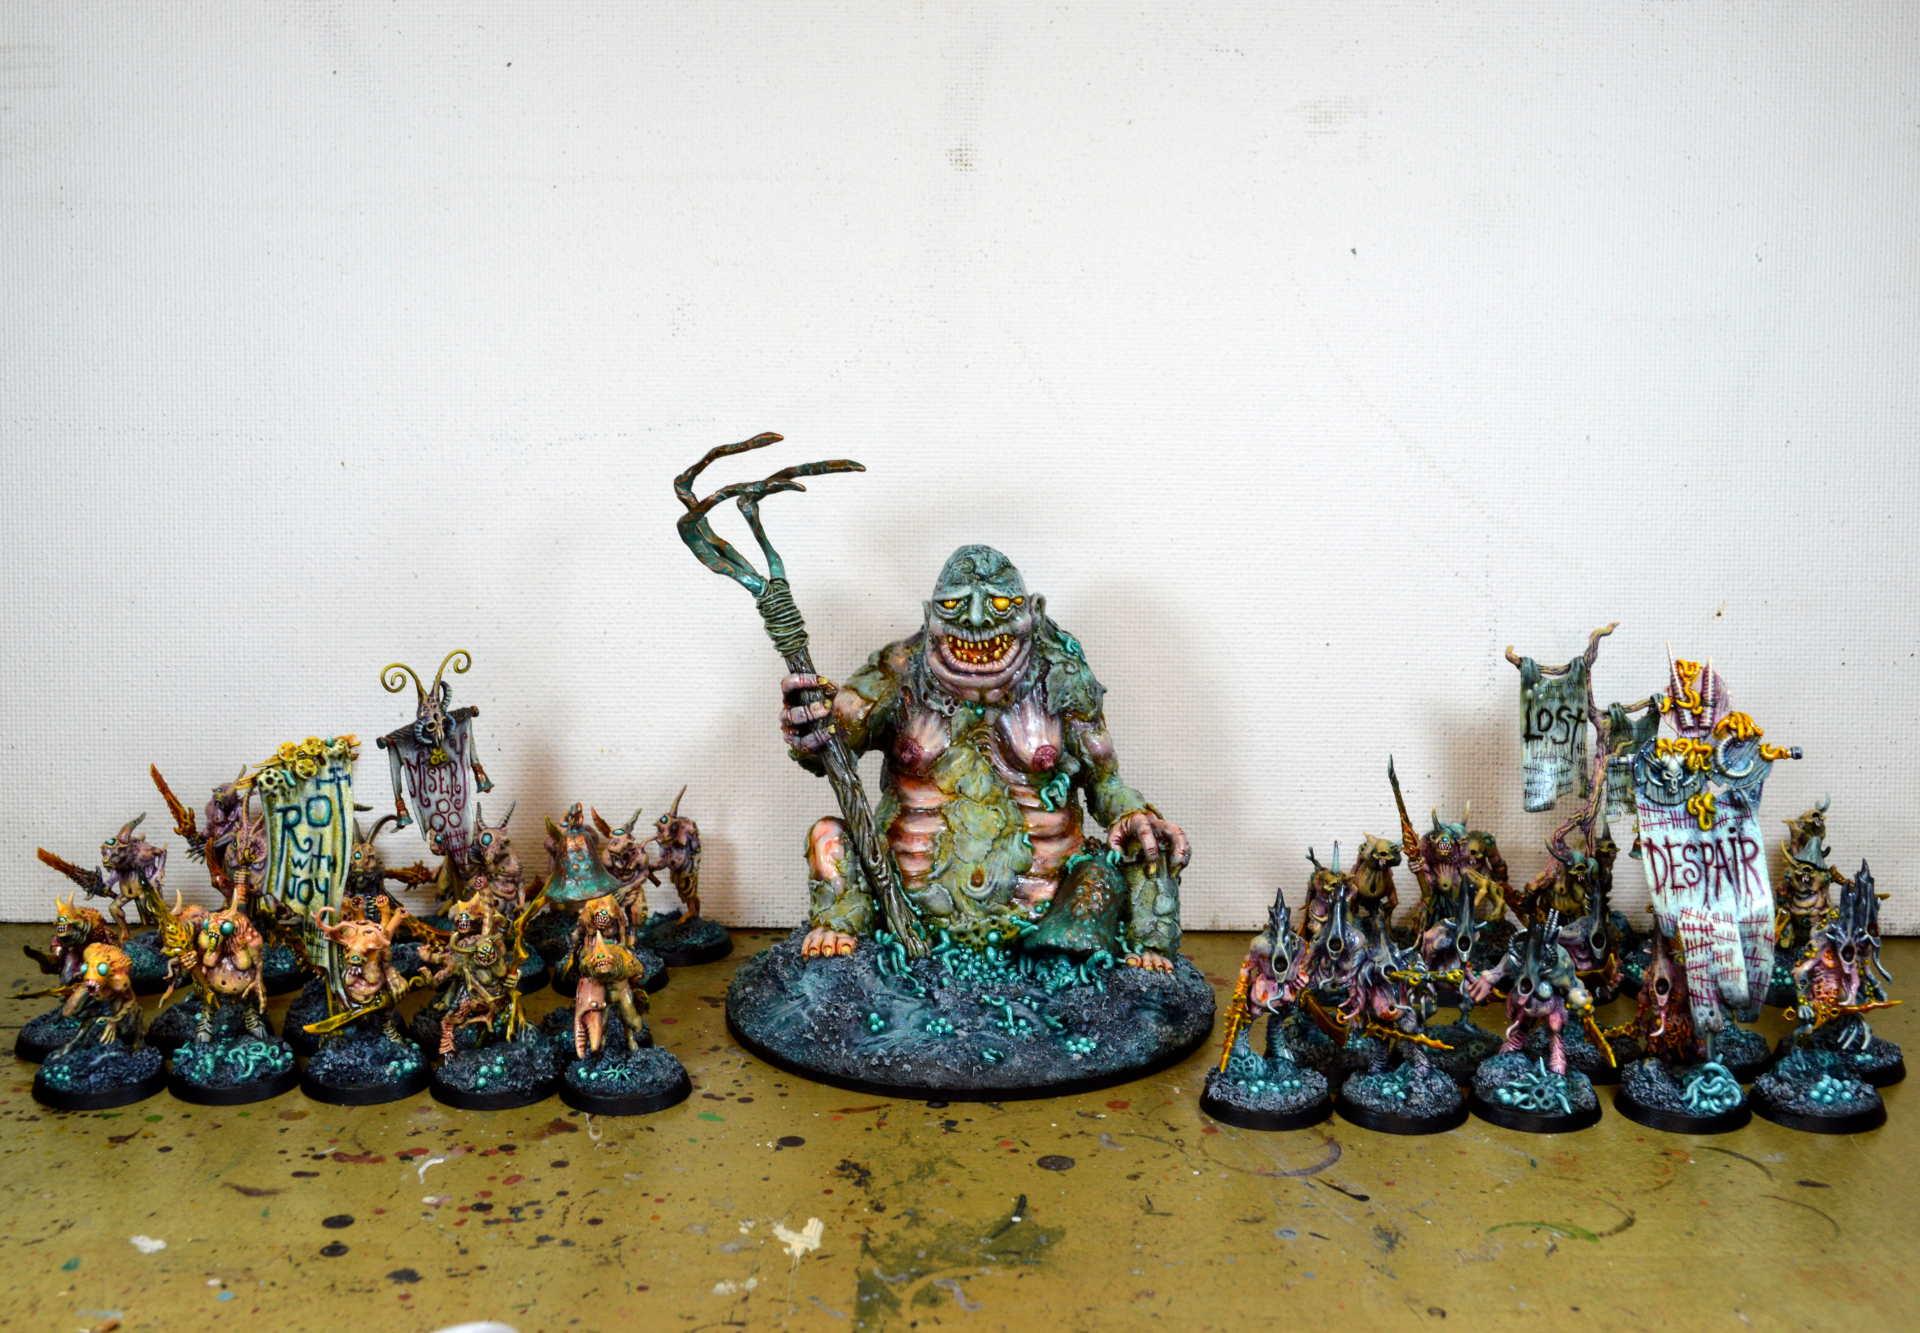 Age Of Sigmar, Chaos, Conversion, Daemons, Do-it-yourself, Great Unclean One, Kitbash, Maggotkin, Nurgle, Plaguebearers, Scratch Build, Sculpting, Warhammer 40,000, Warhammer Fantasy